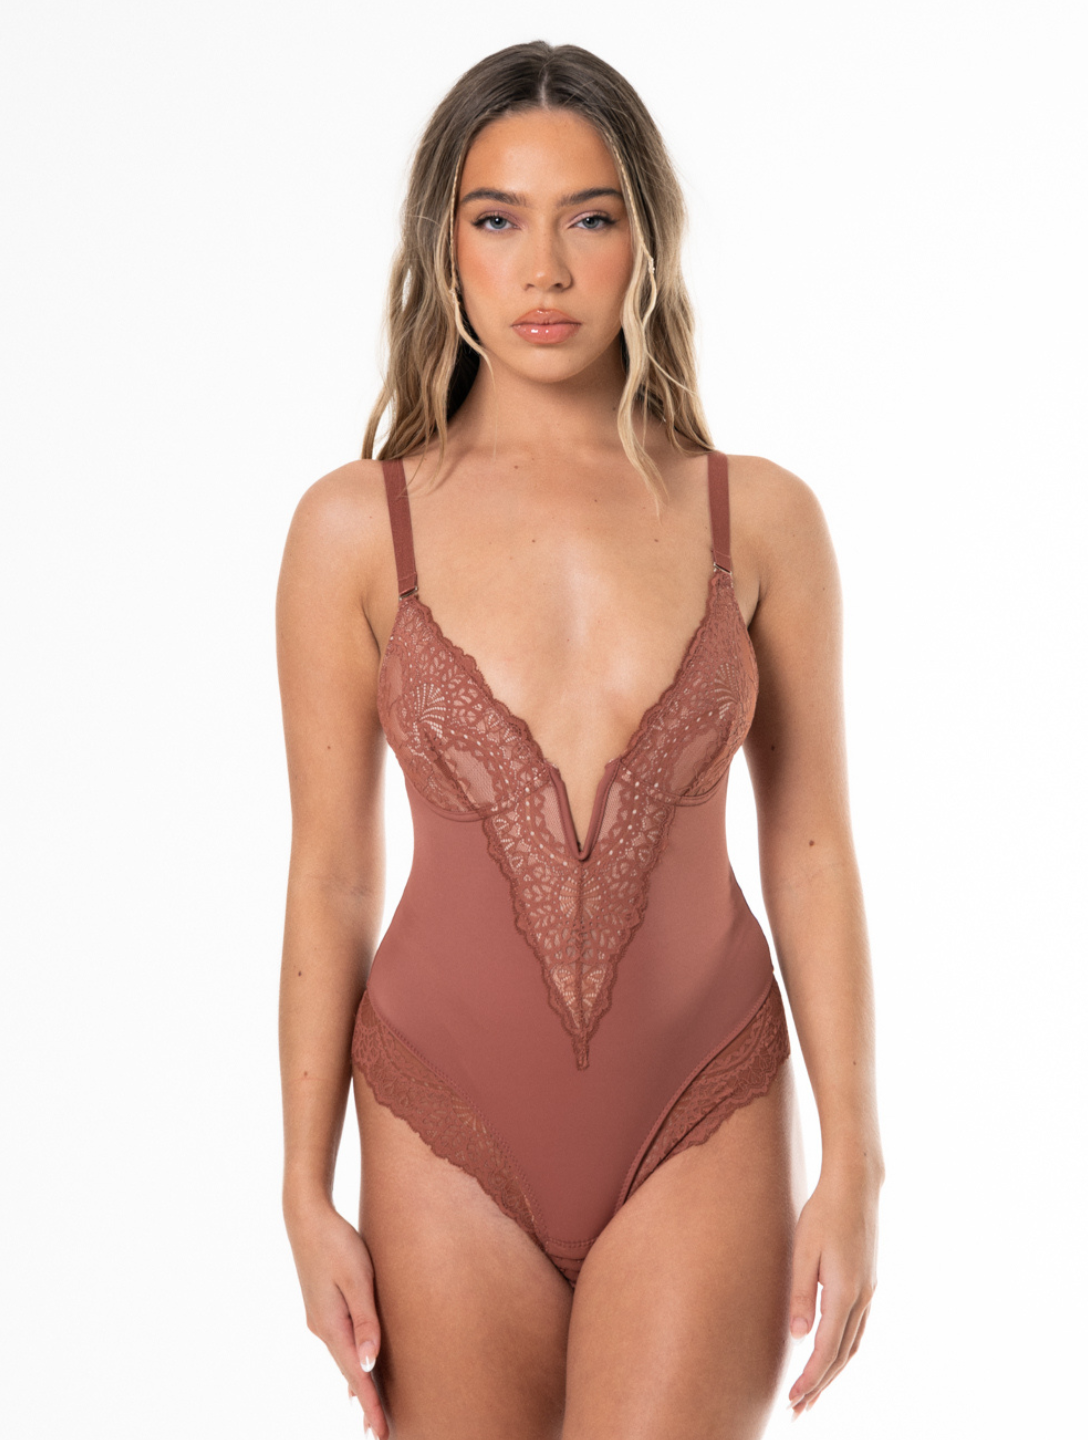 Lovasy Lace Bodysuit for Women One Piece Snap Crotch Body Suit